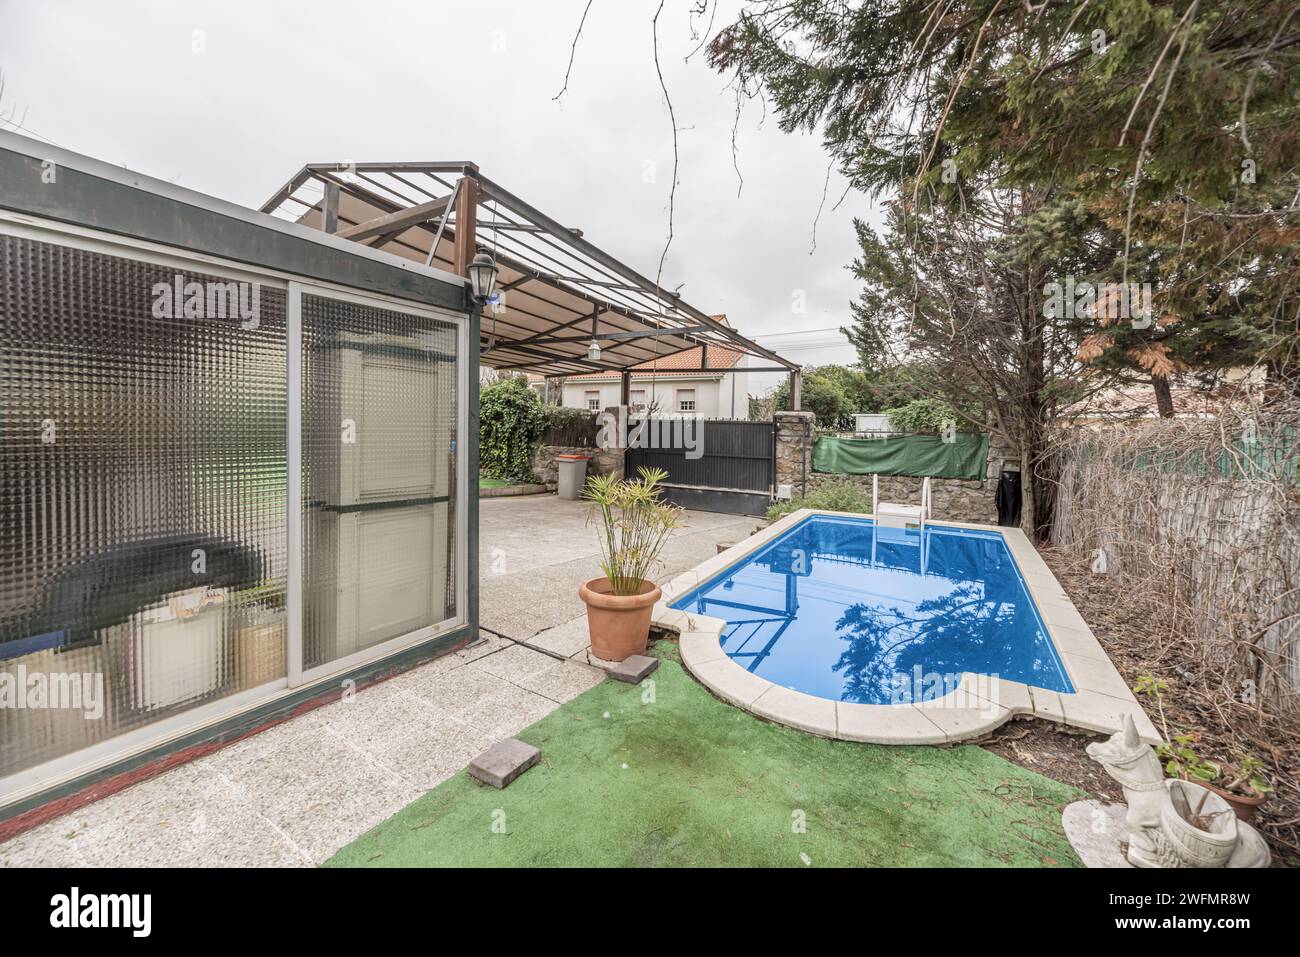 A small pool within a plot with a large awning on a metal structure and a porch with an aluminum and glass enclosure. Stock Photo